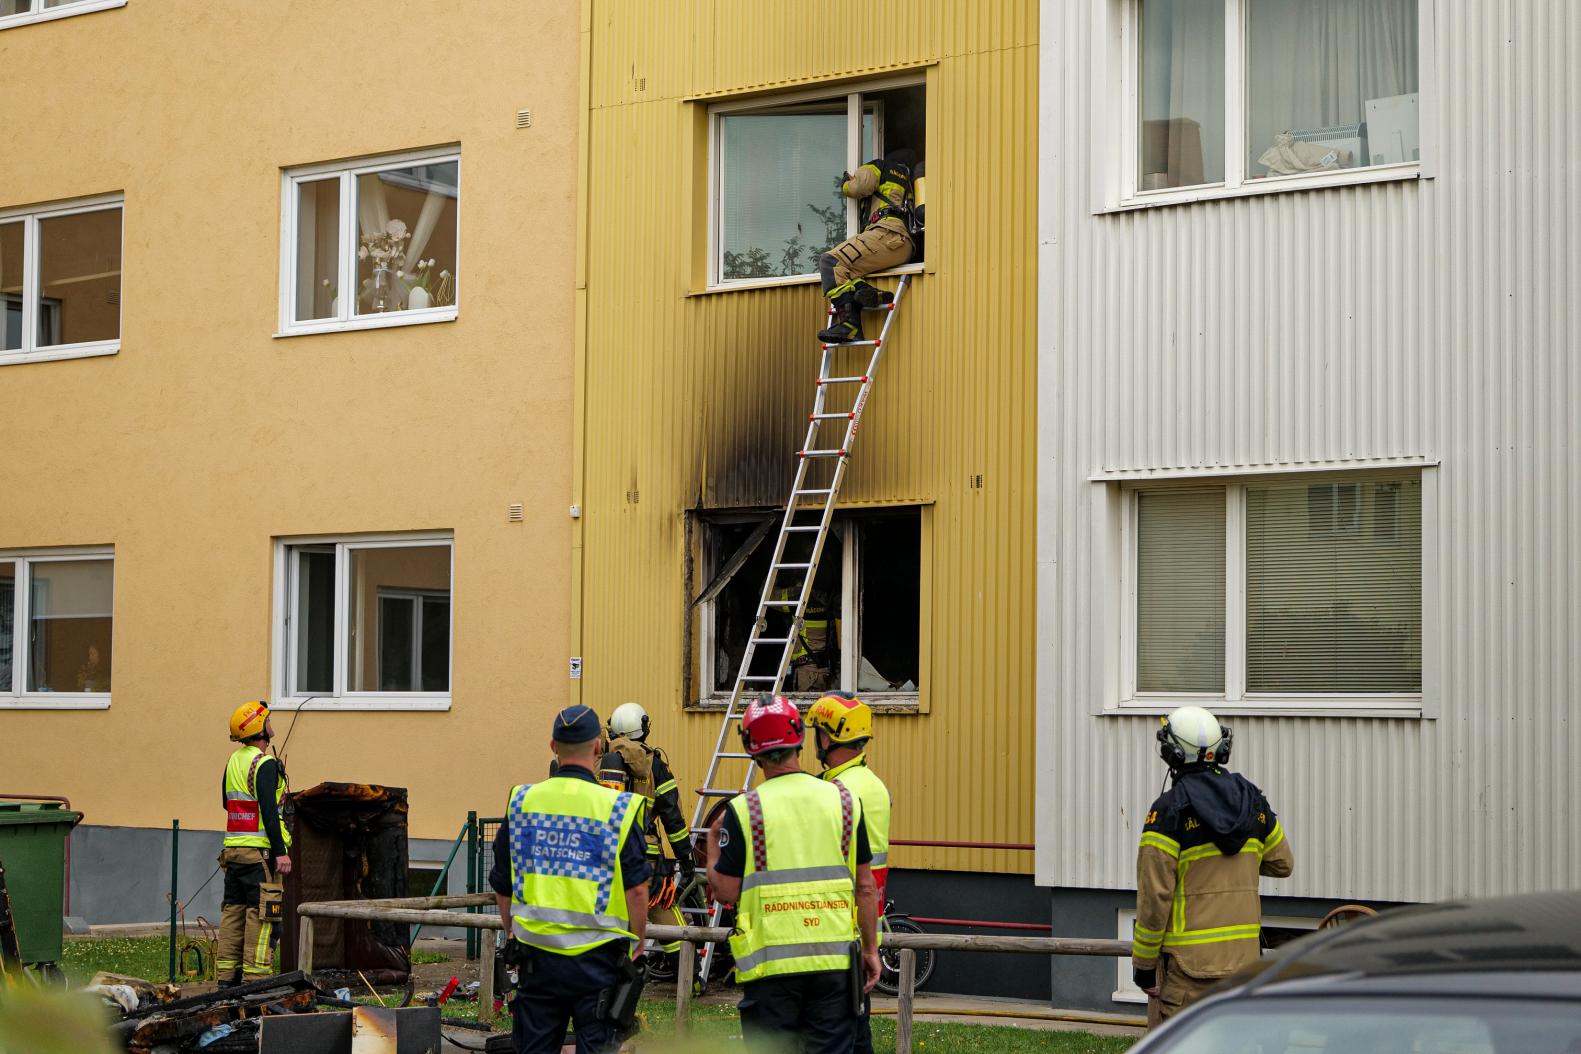 
            Seven people taken to hospital after bike battery explosion in Malmö apartment
        